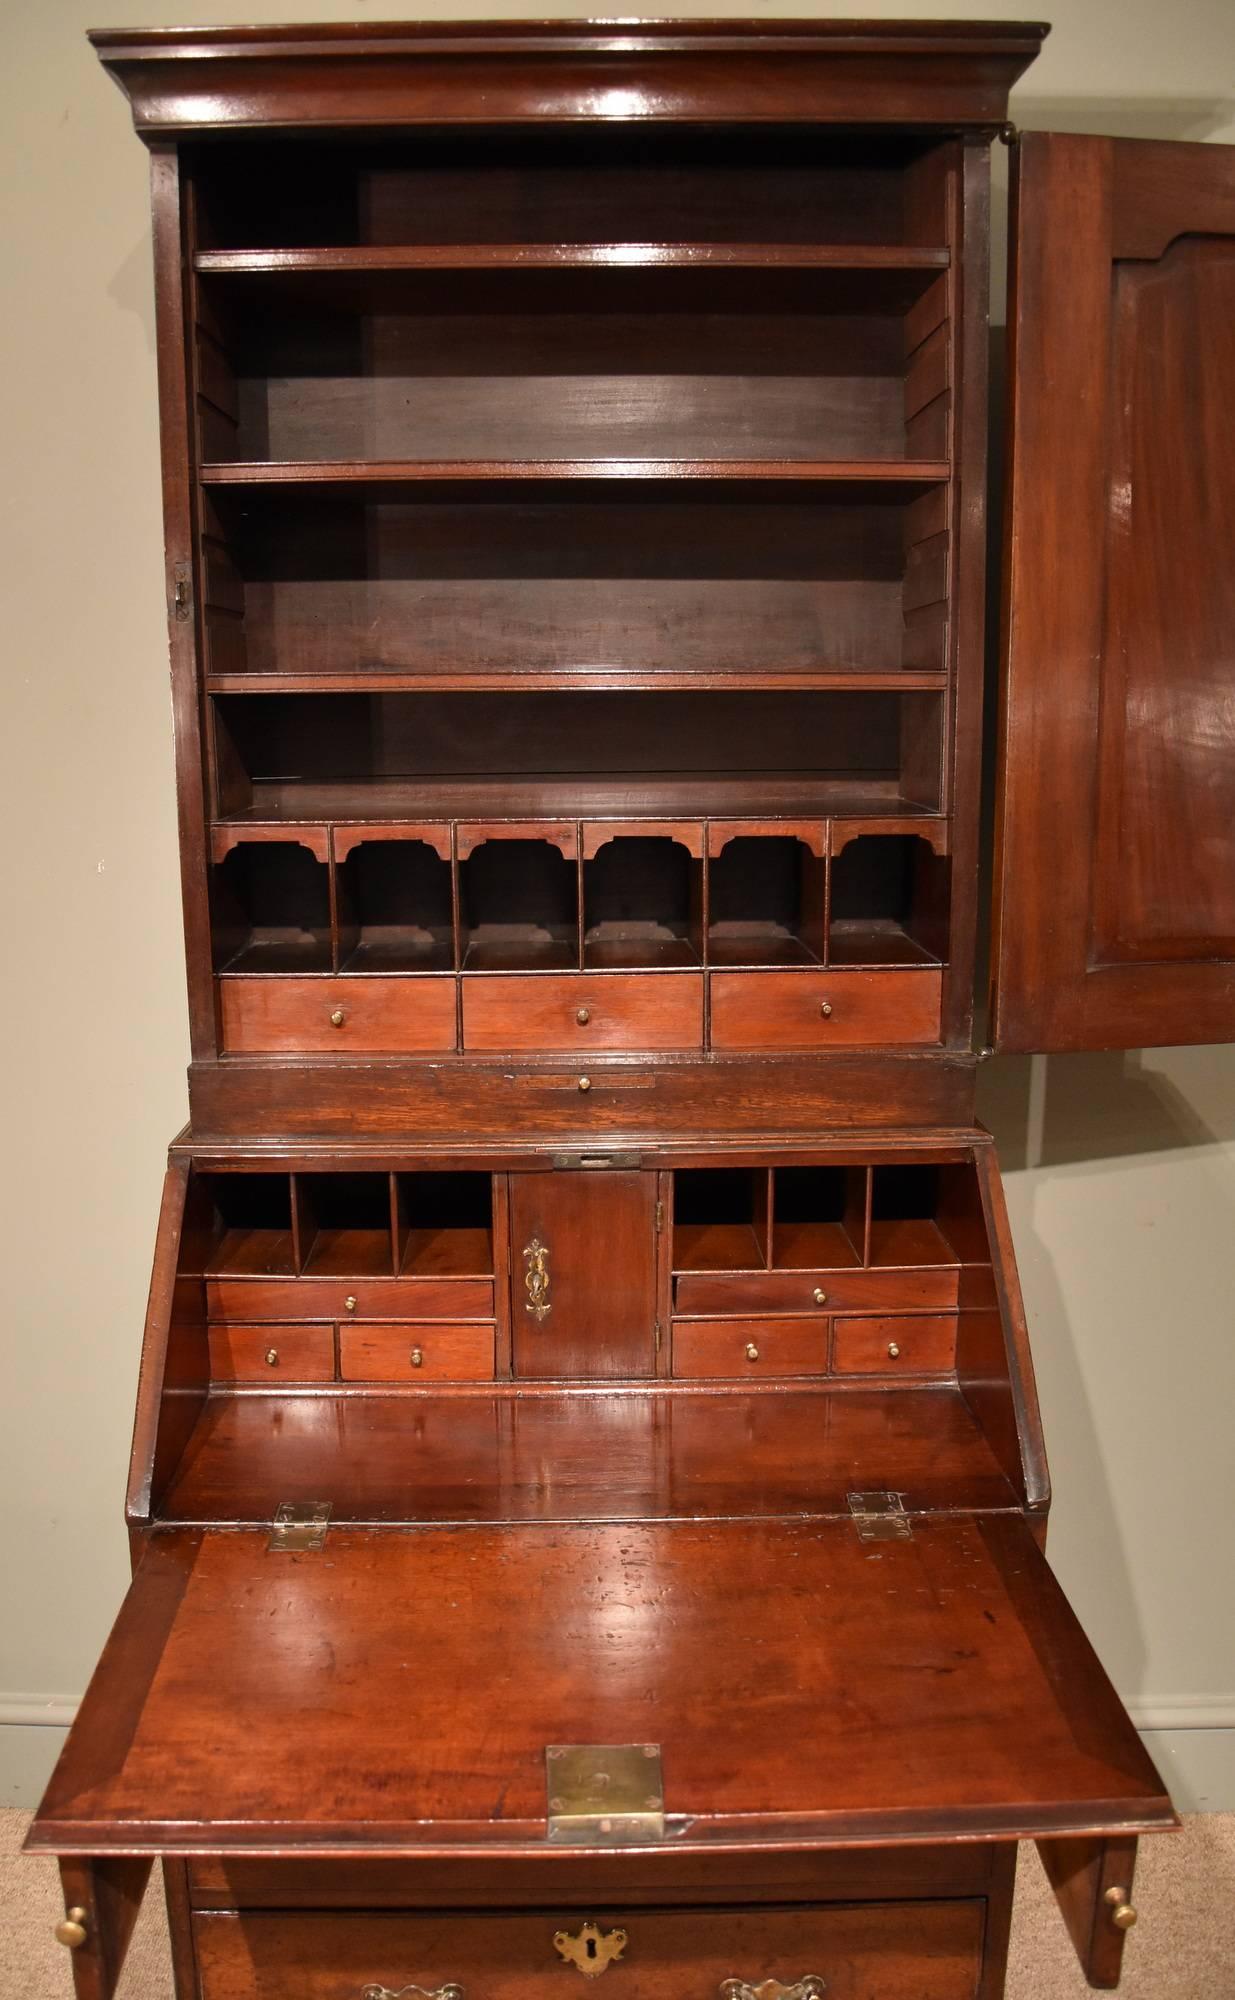 A fine small George II mahogany bureau bookcase with fitted upper and lower section. Also original handles escutcheons locks and feet.

Dimensions
Height 70